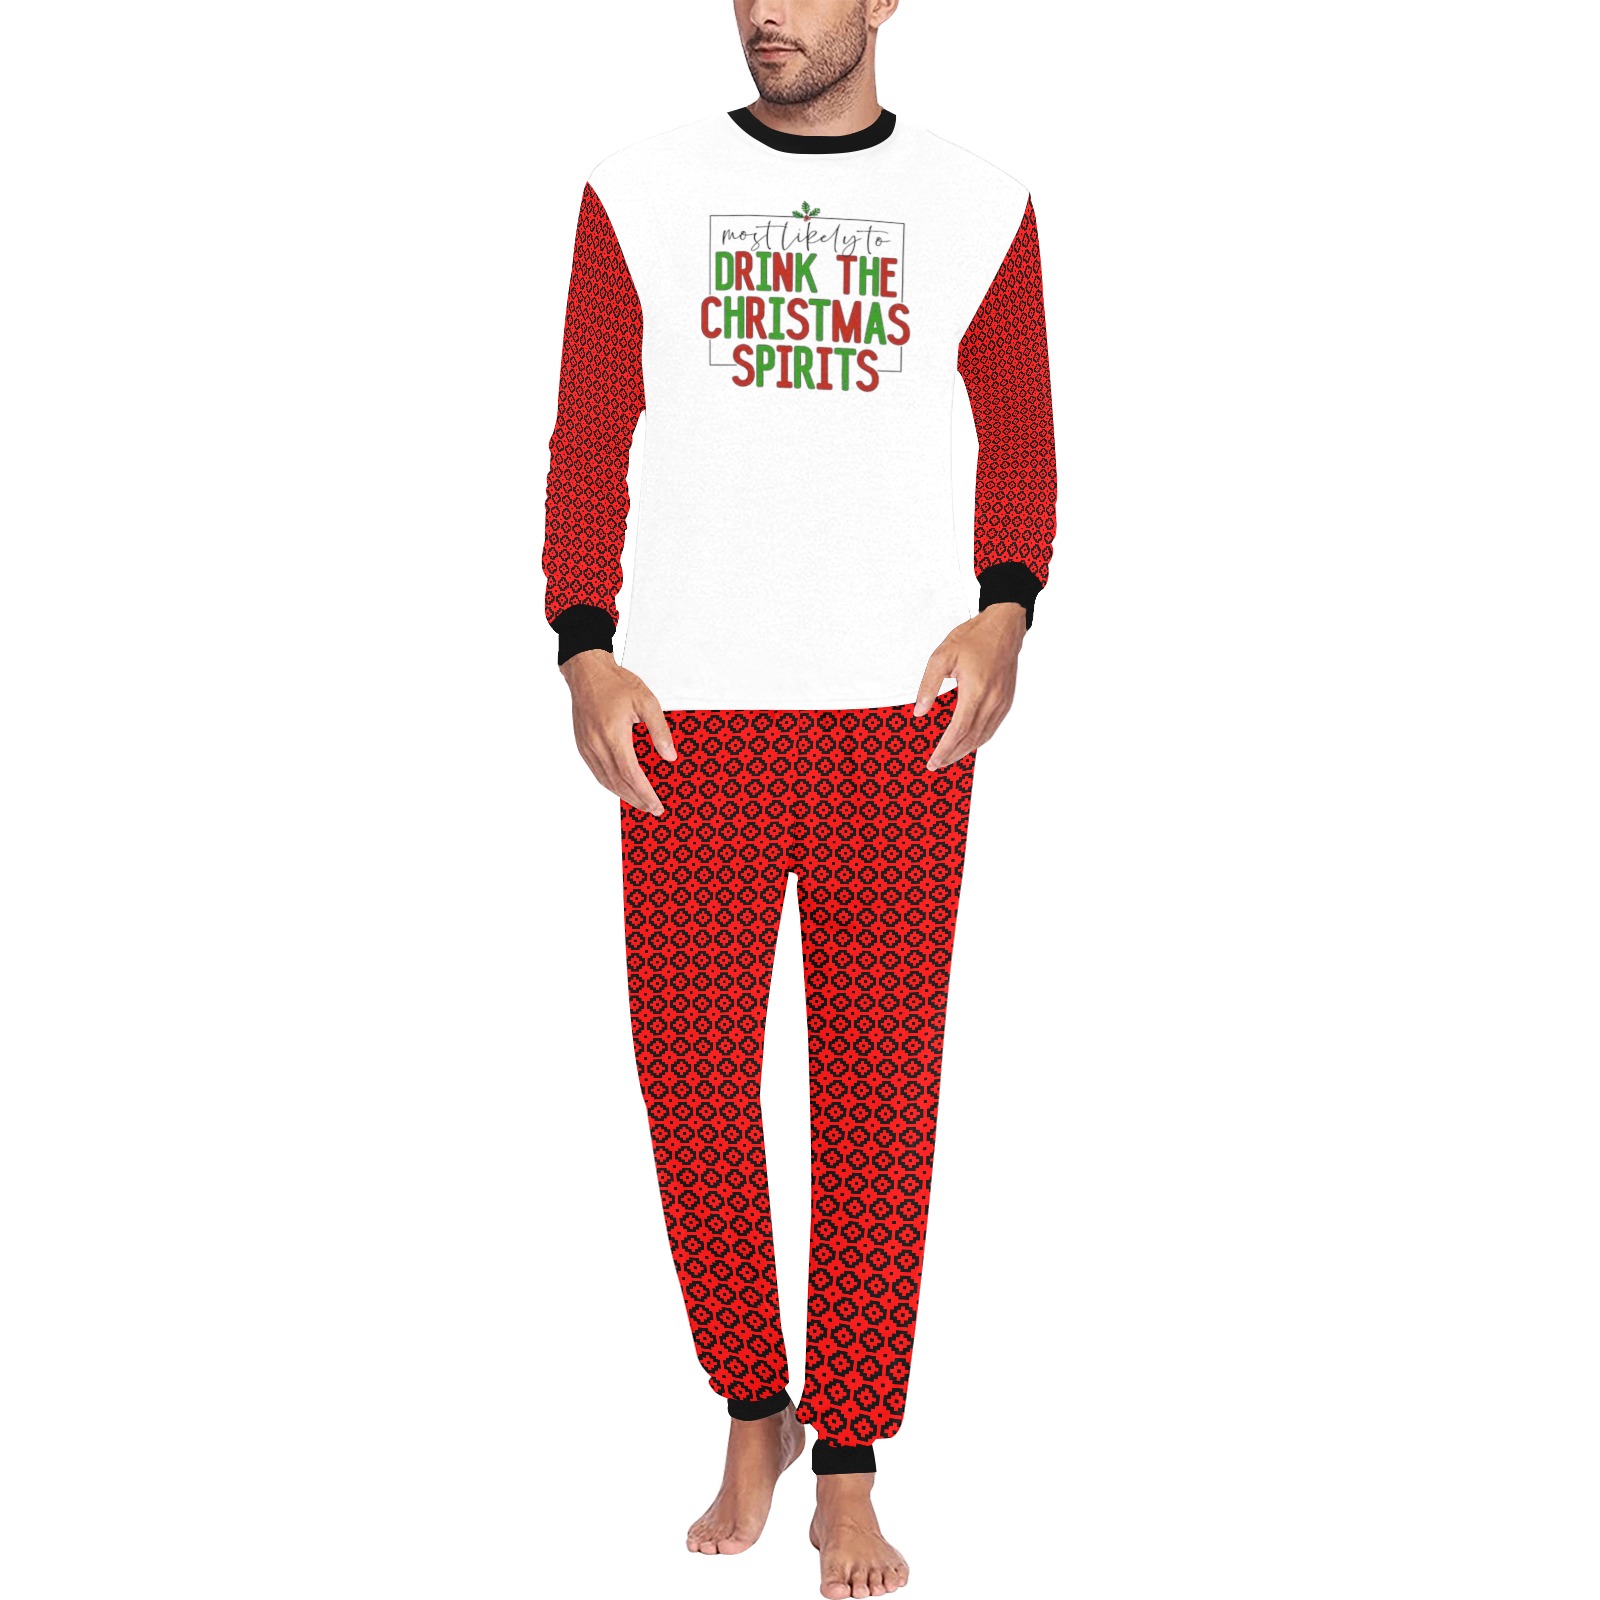 Most Likely to Drank the Christmas Spirits Men's All Over Print Pajama Set